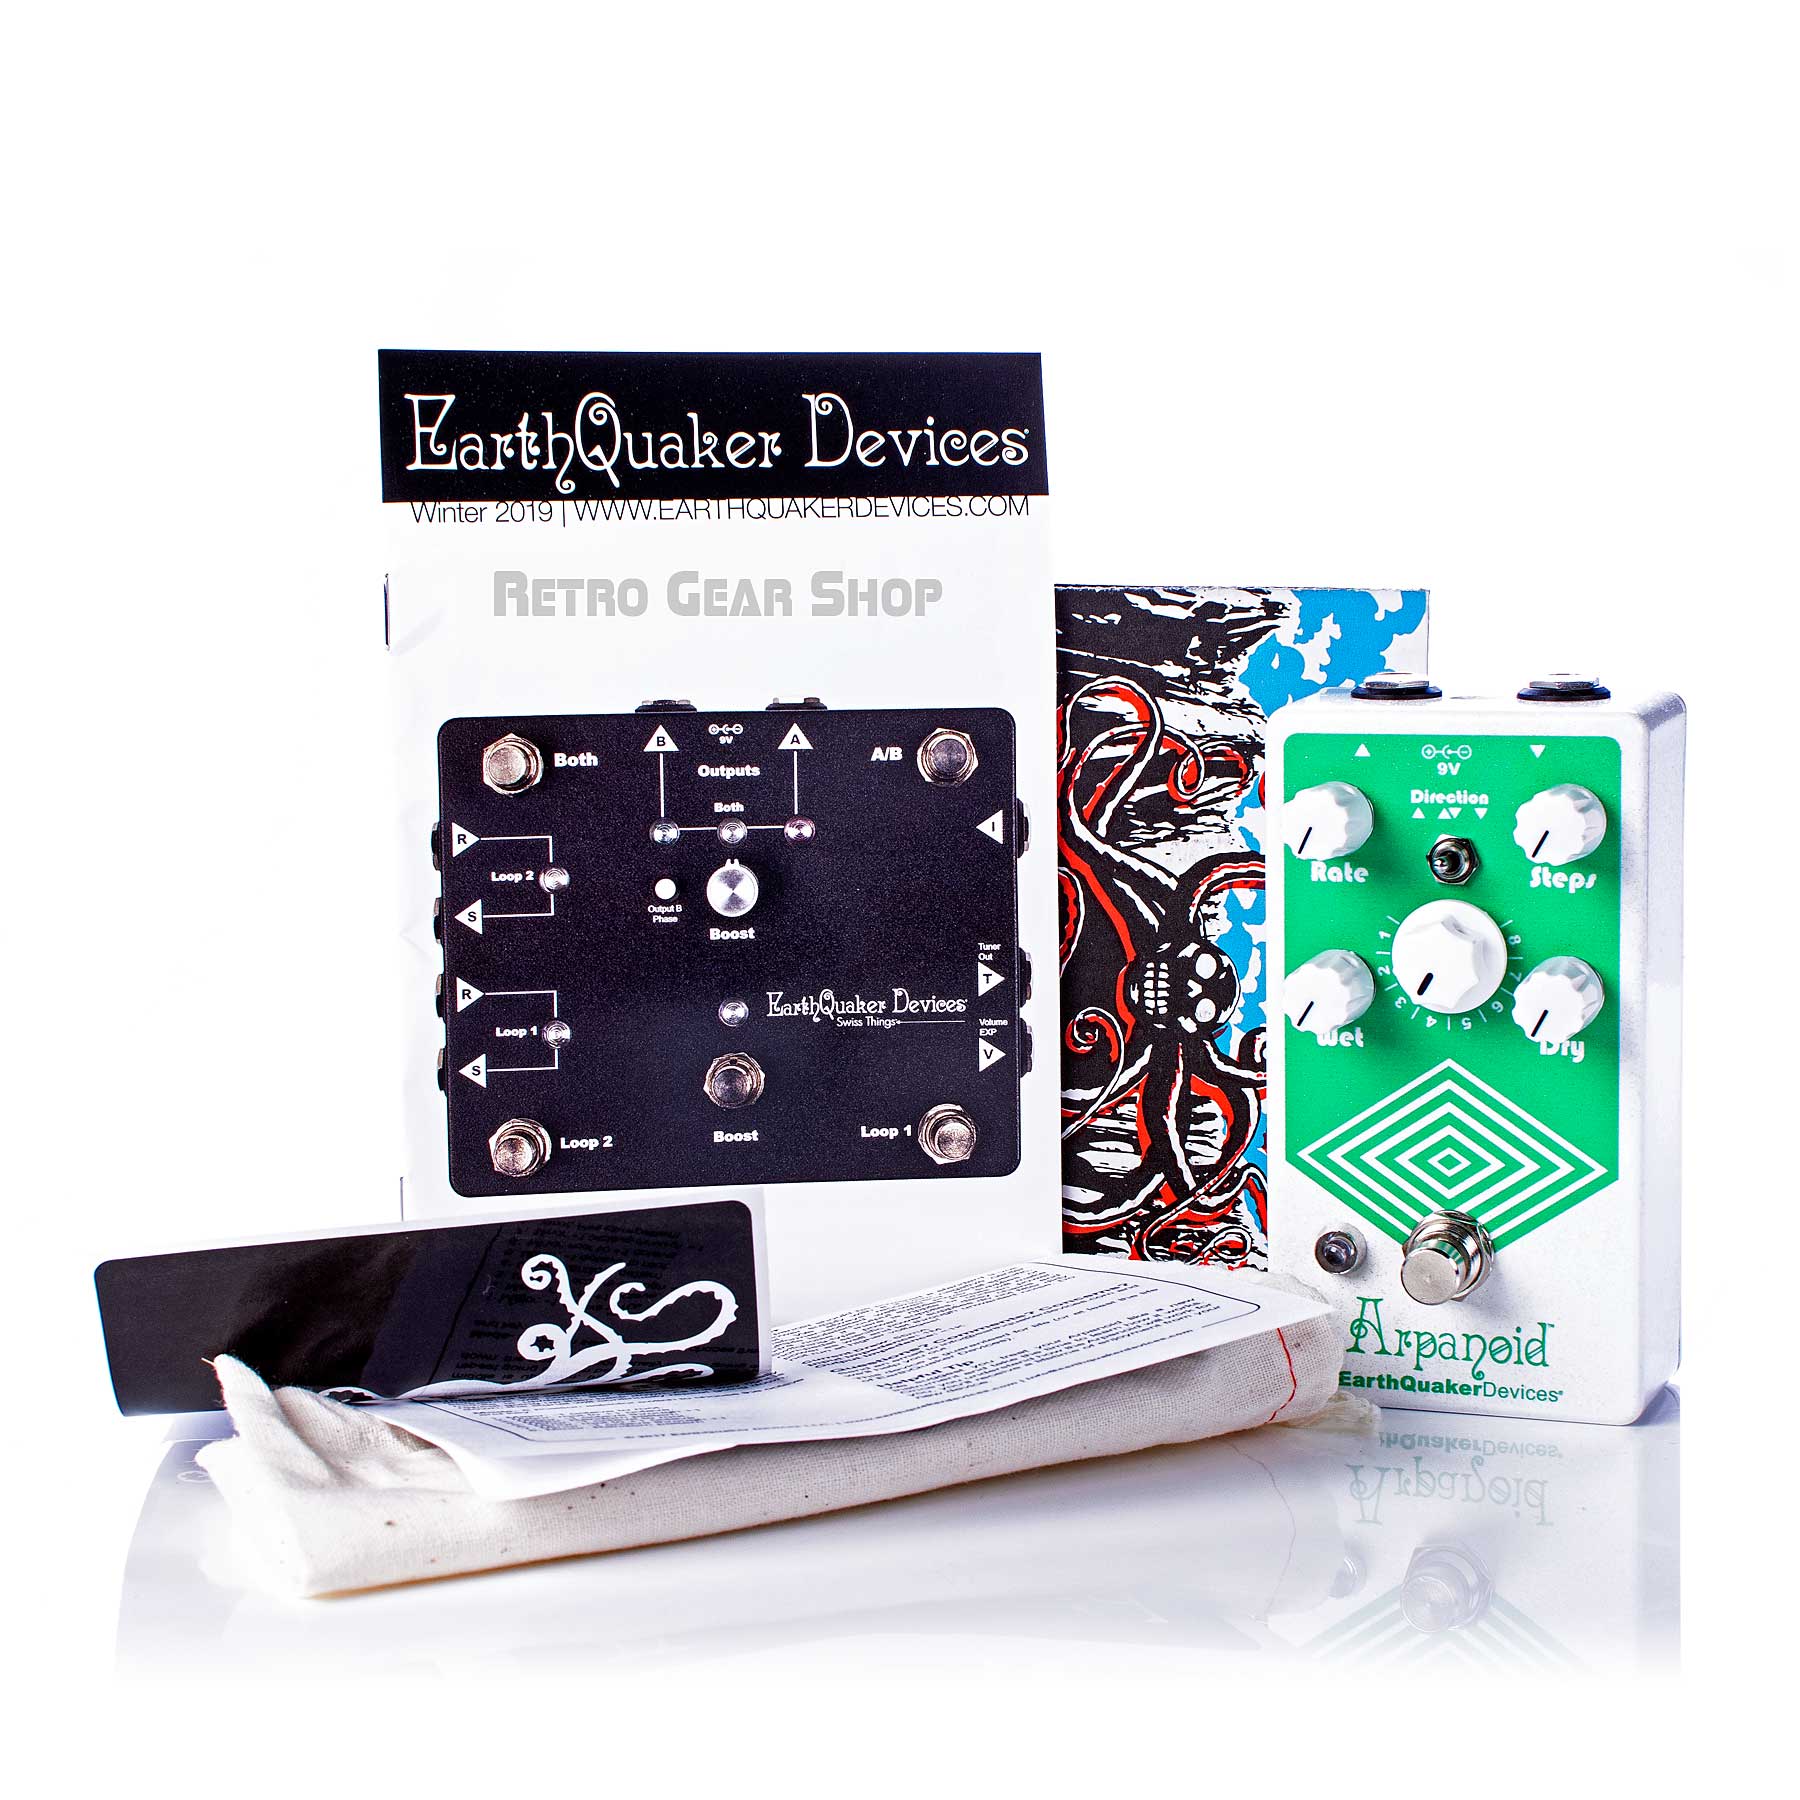 EarthQuaker Devices Arpanoid V2 Box Manual Extras